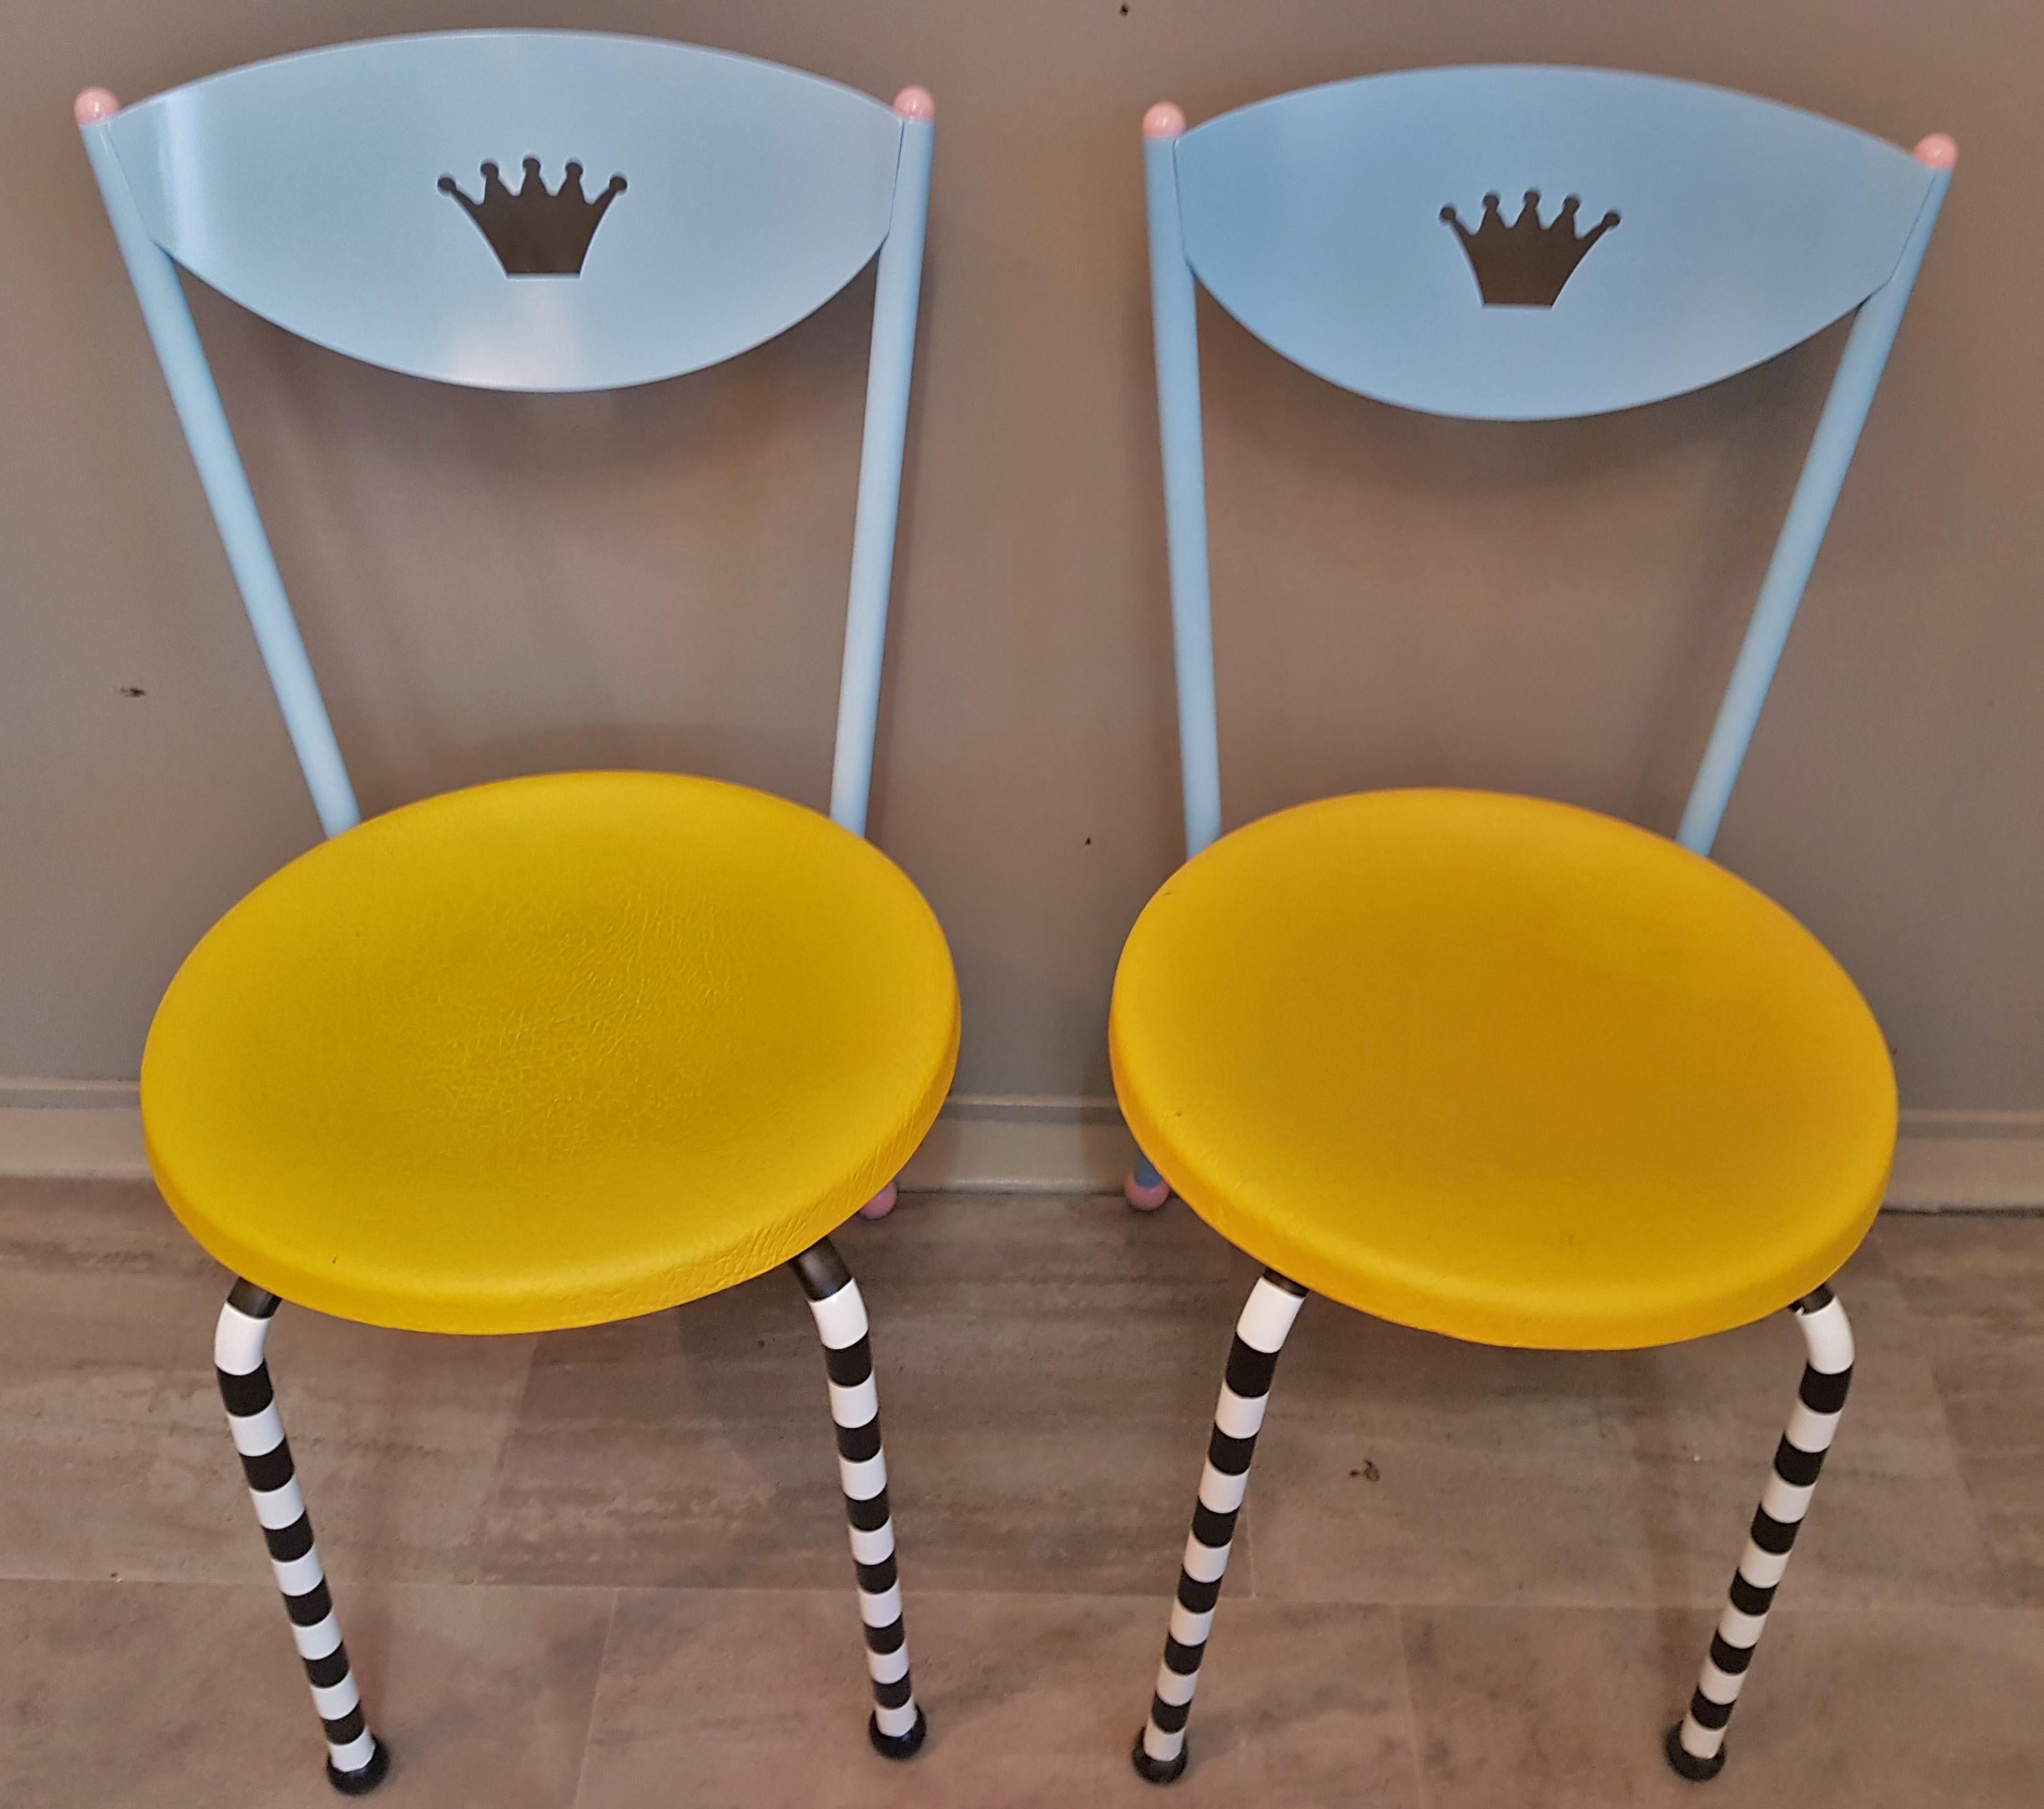 8 Memphis Postmodern Dining Chairs Manner of Michele De Lucci, Italy, 1980s For Sale 6